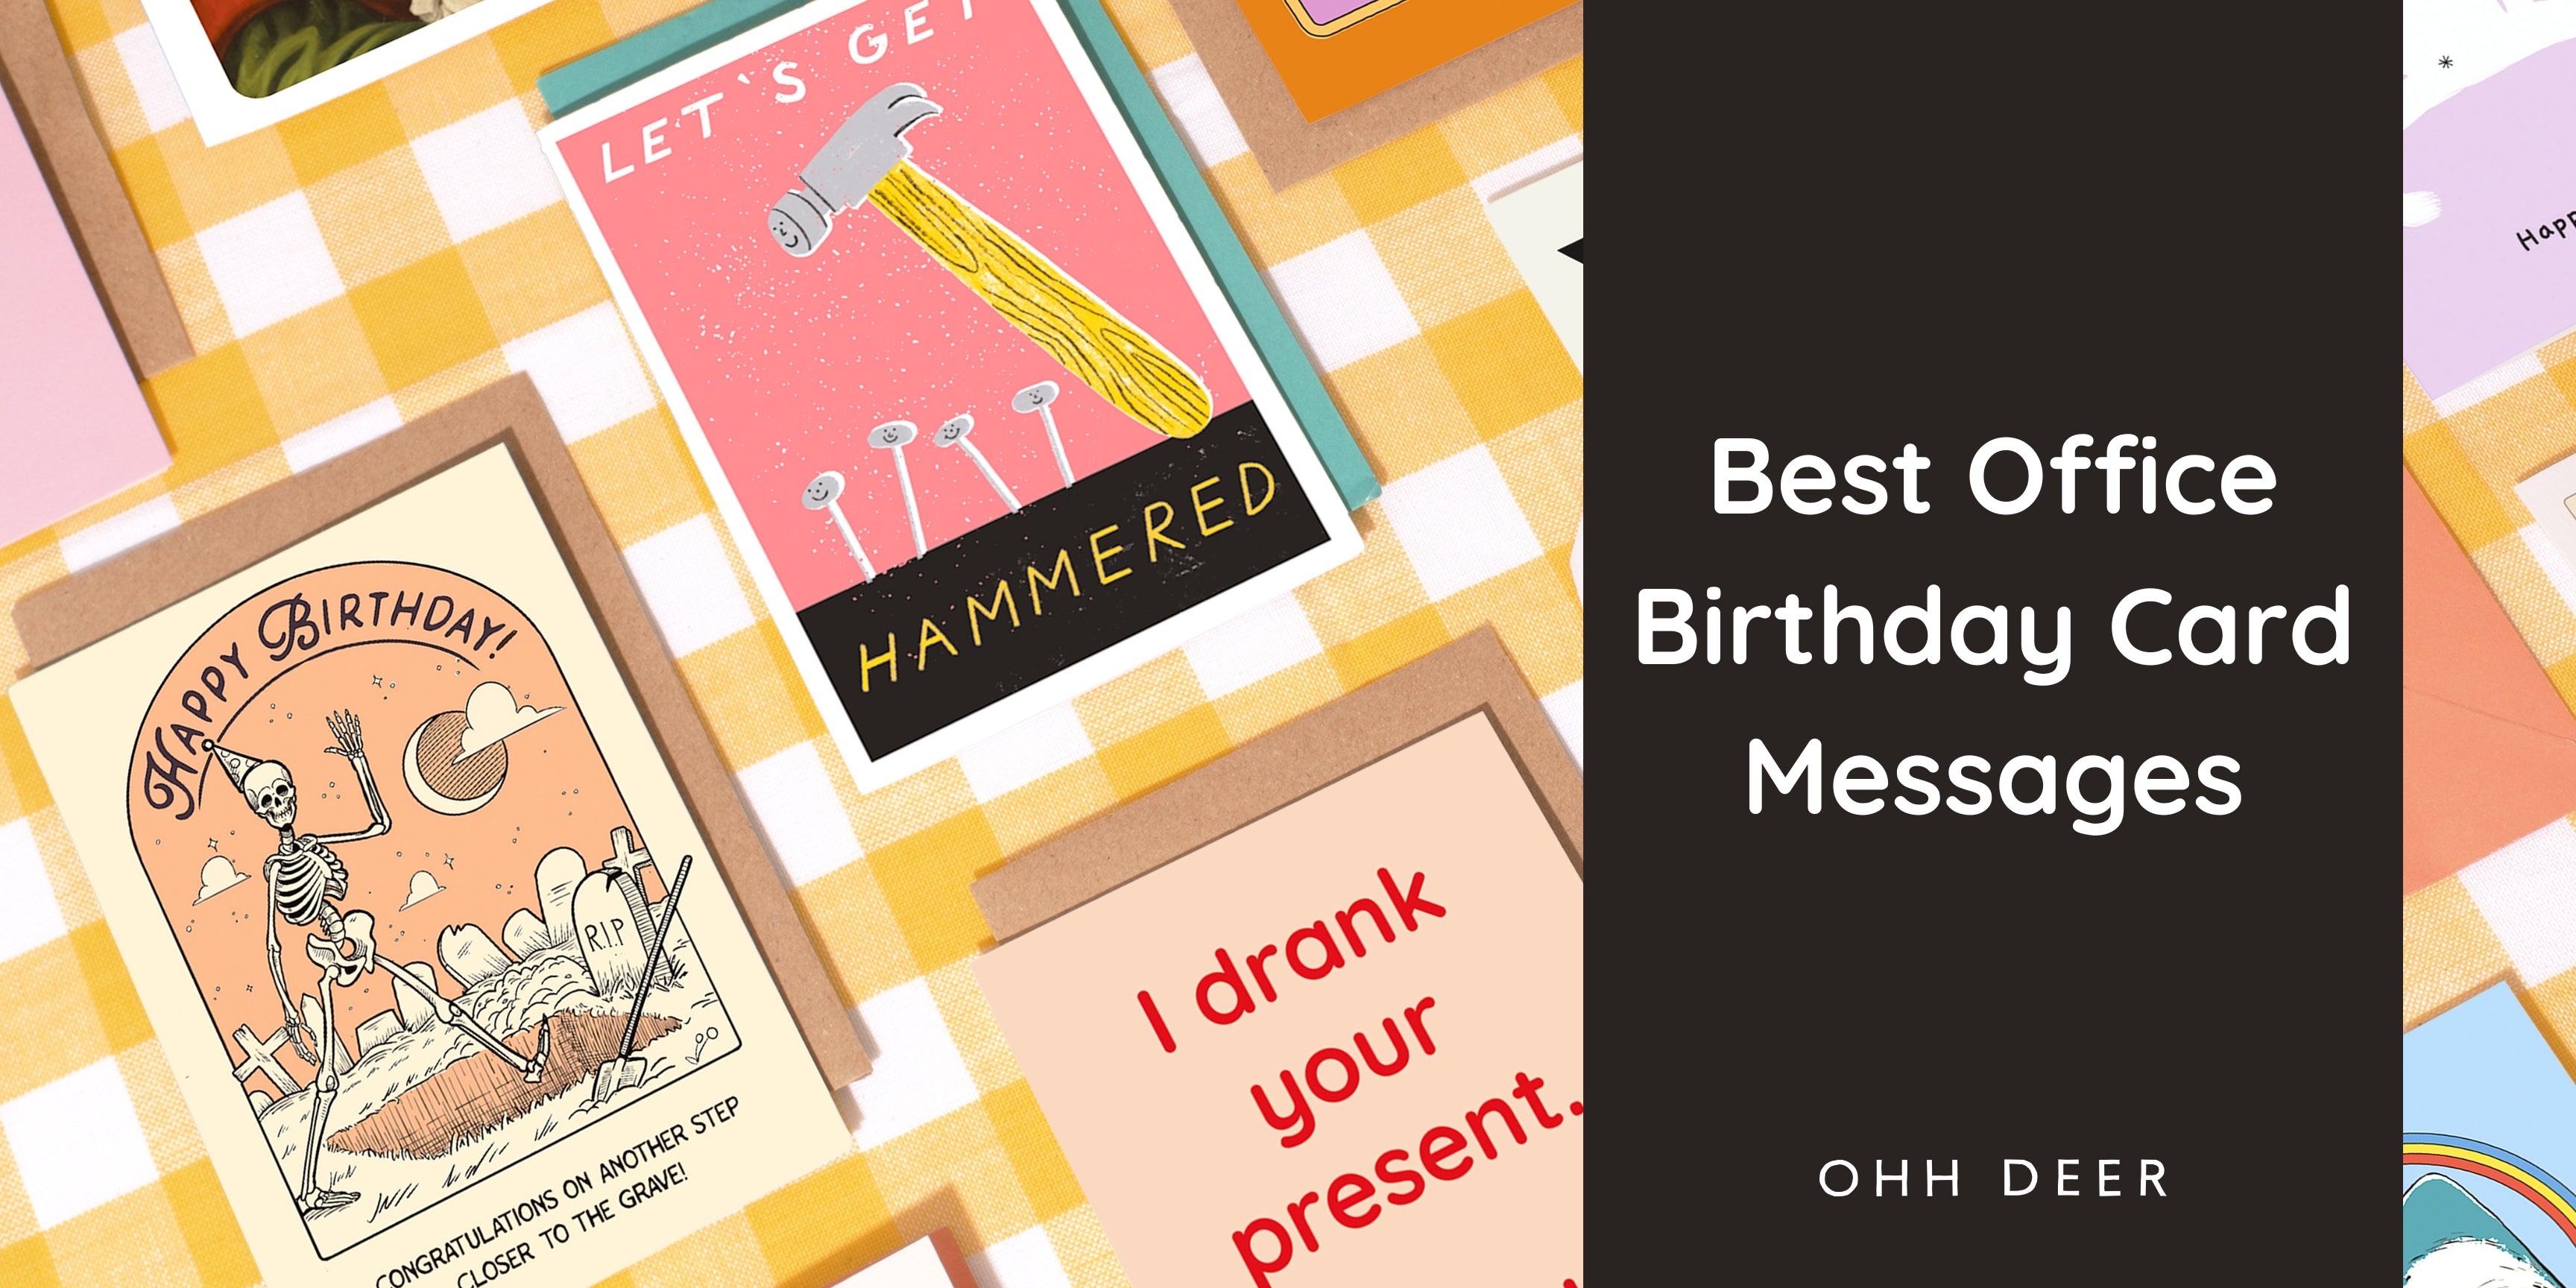 best office birthday card message ideas banner showing several birthday greeting cards